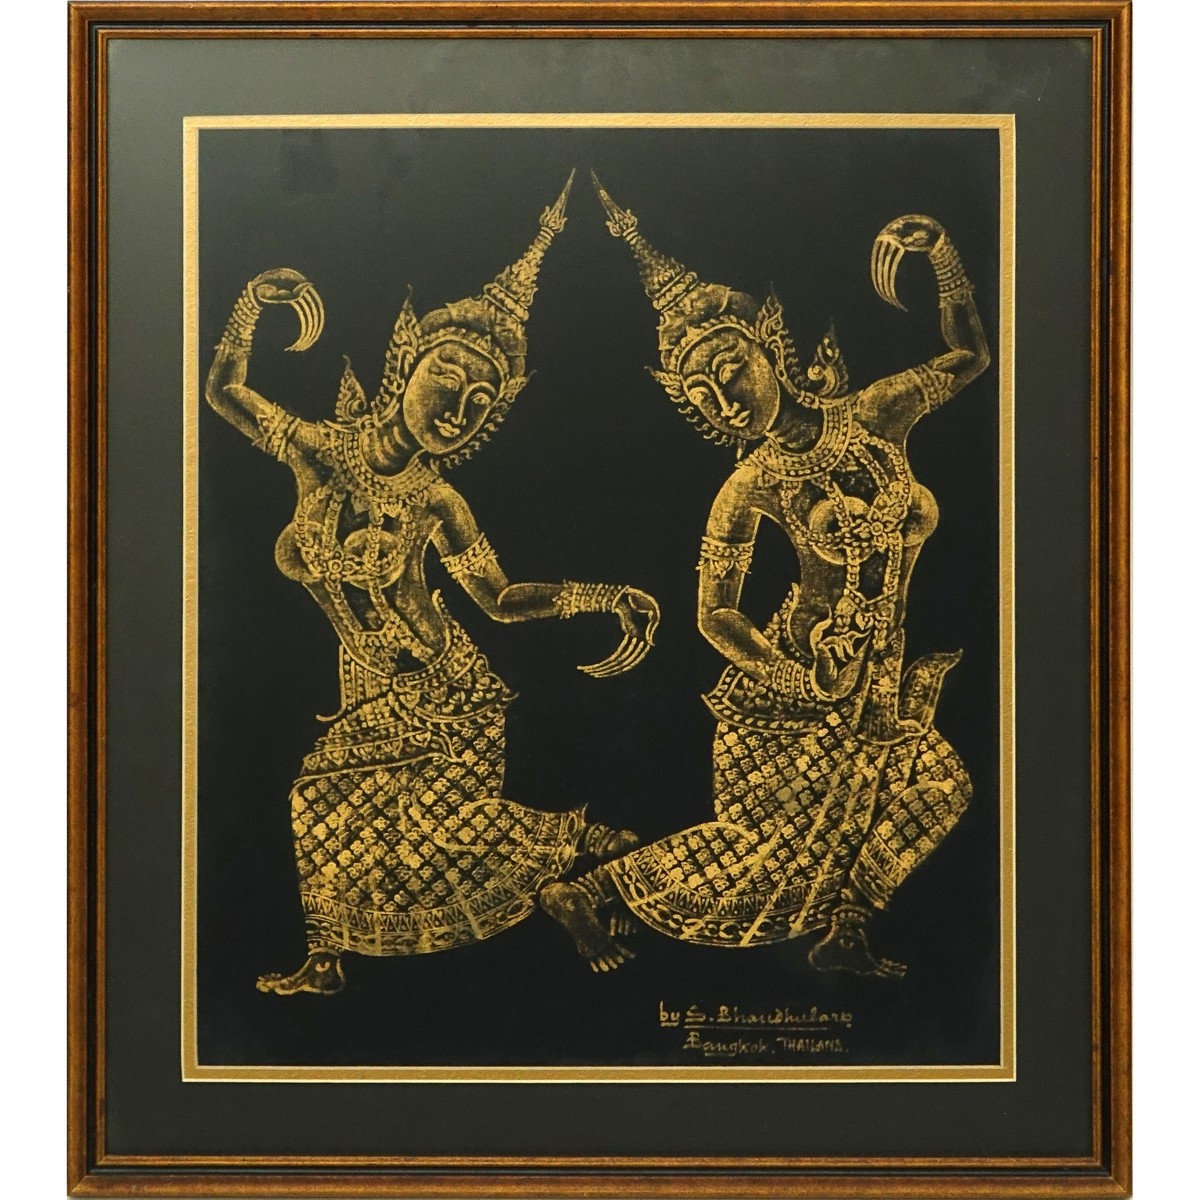 S. Bhaudhularp (20th C) Acrylic on Fabric, Thai Dancers, Signed and Inscribed Bangkok Thailand Lower Right.